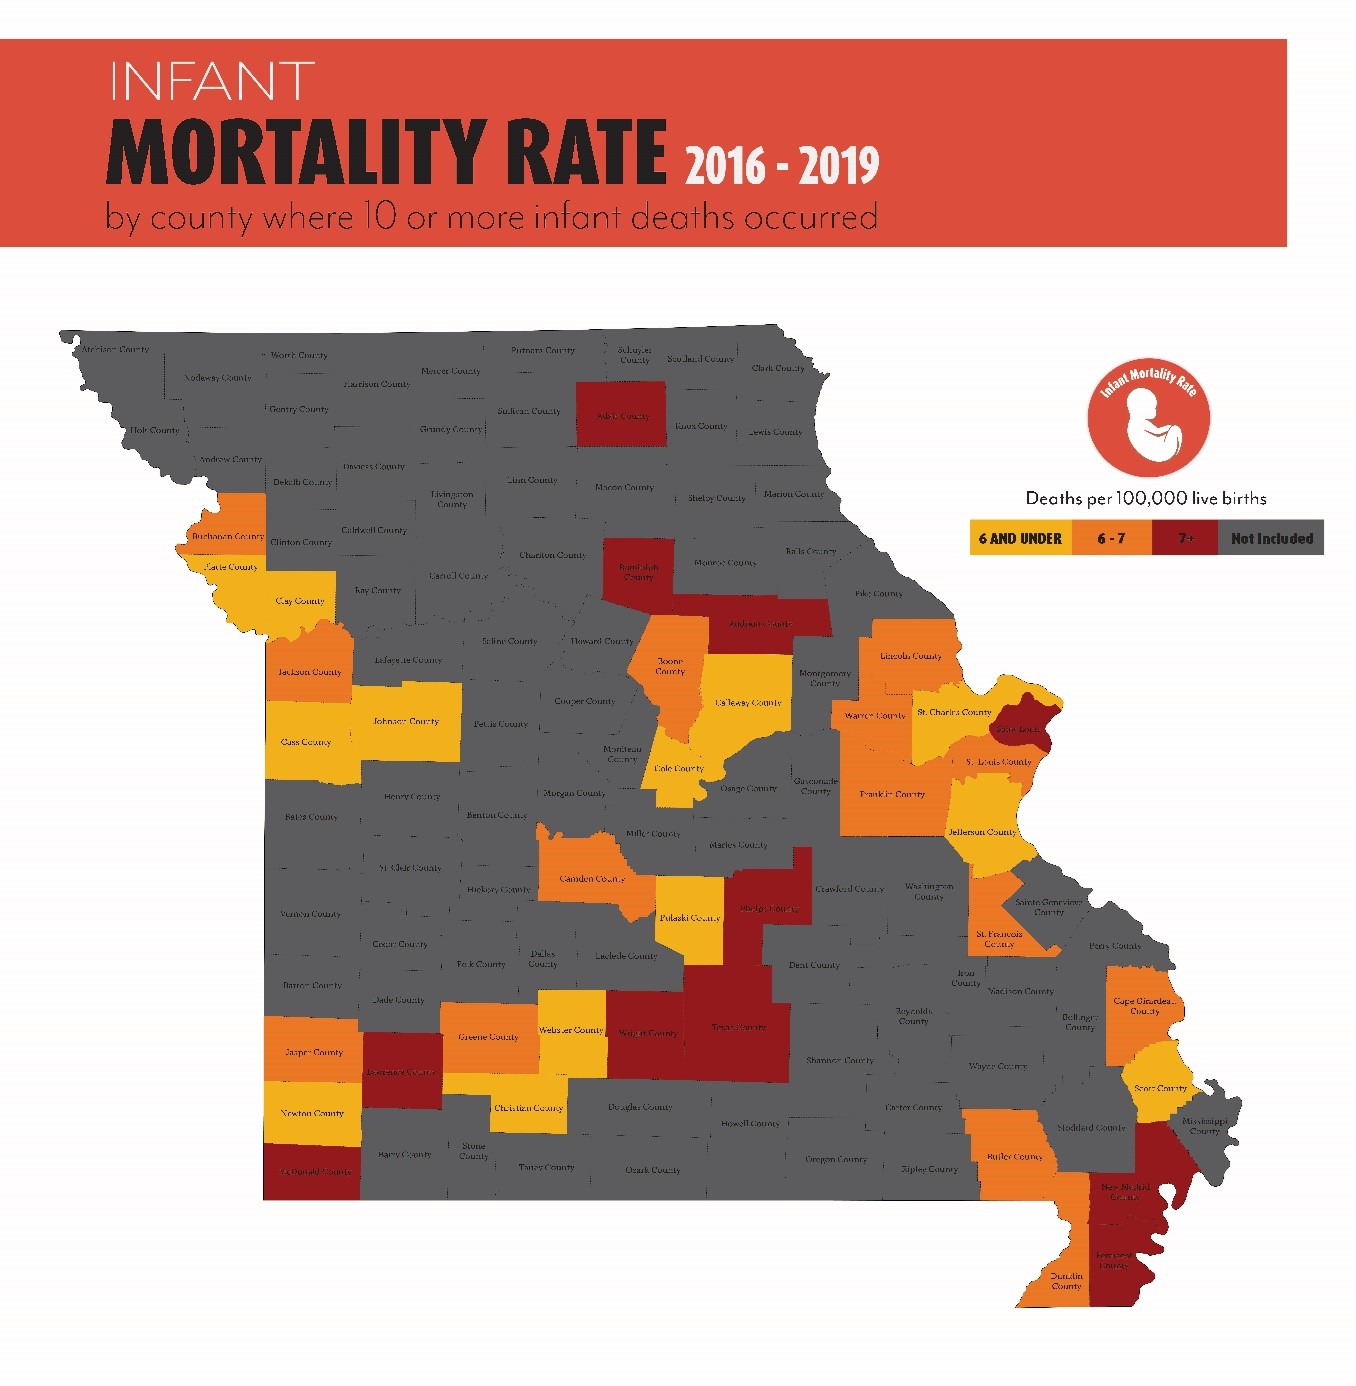 map of Missouri counties and infant mortality rate where ten or more deaths occurred between 2016-2019